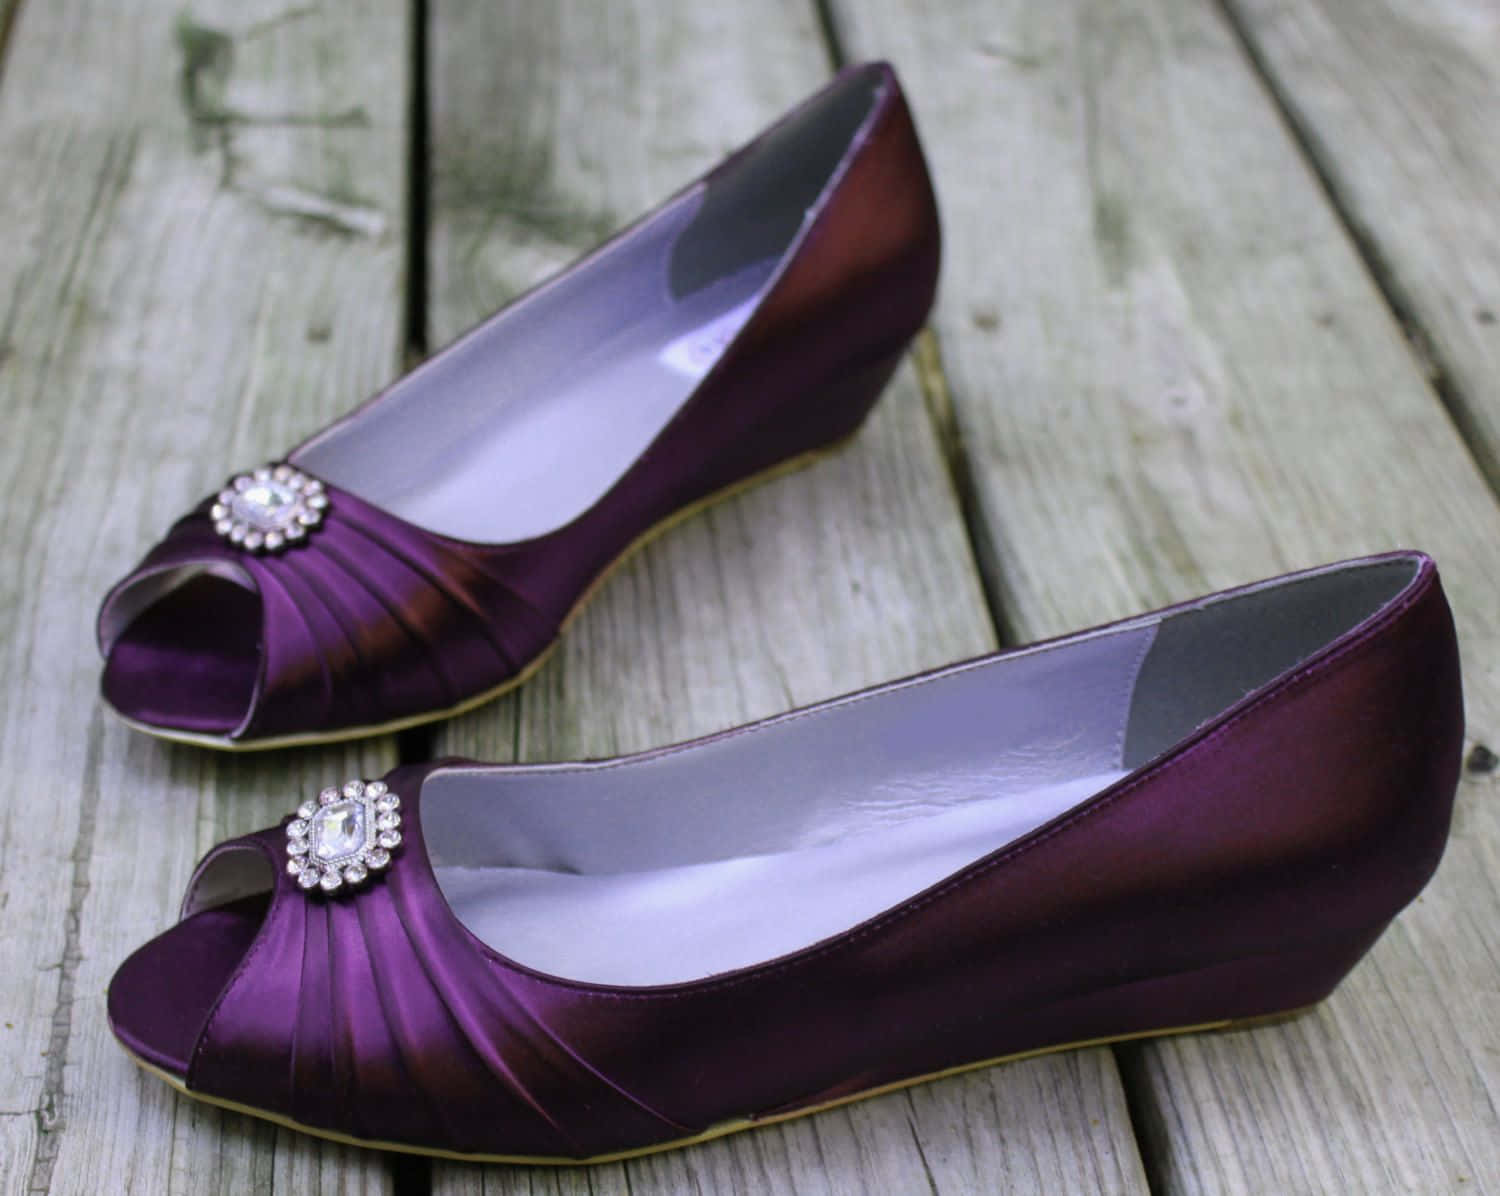 Step out in style withpurple shoes Wallpaper